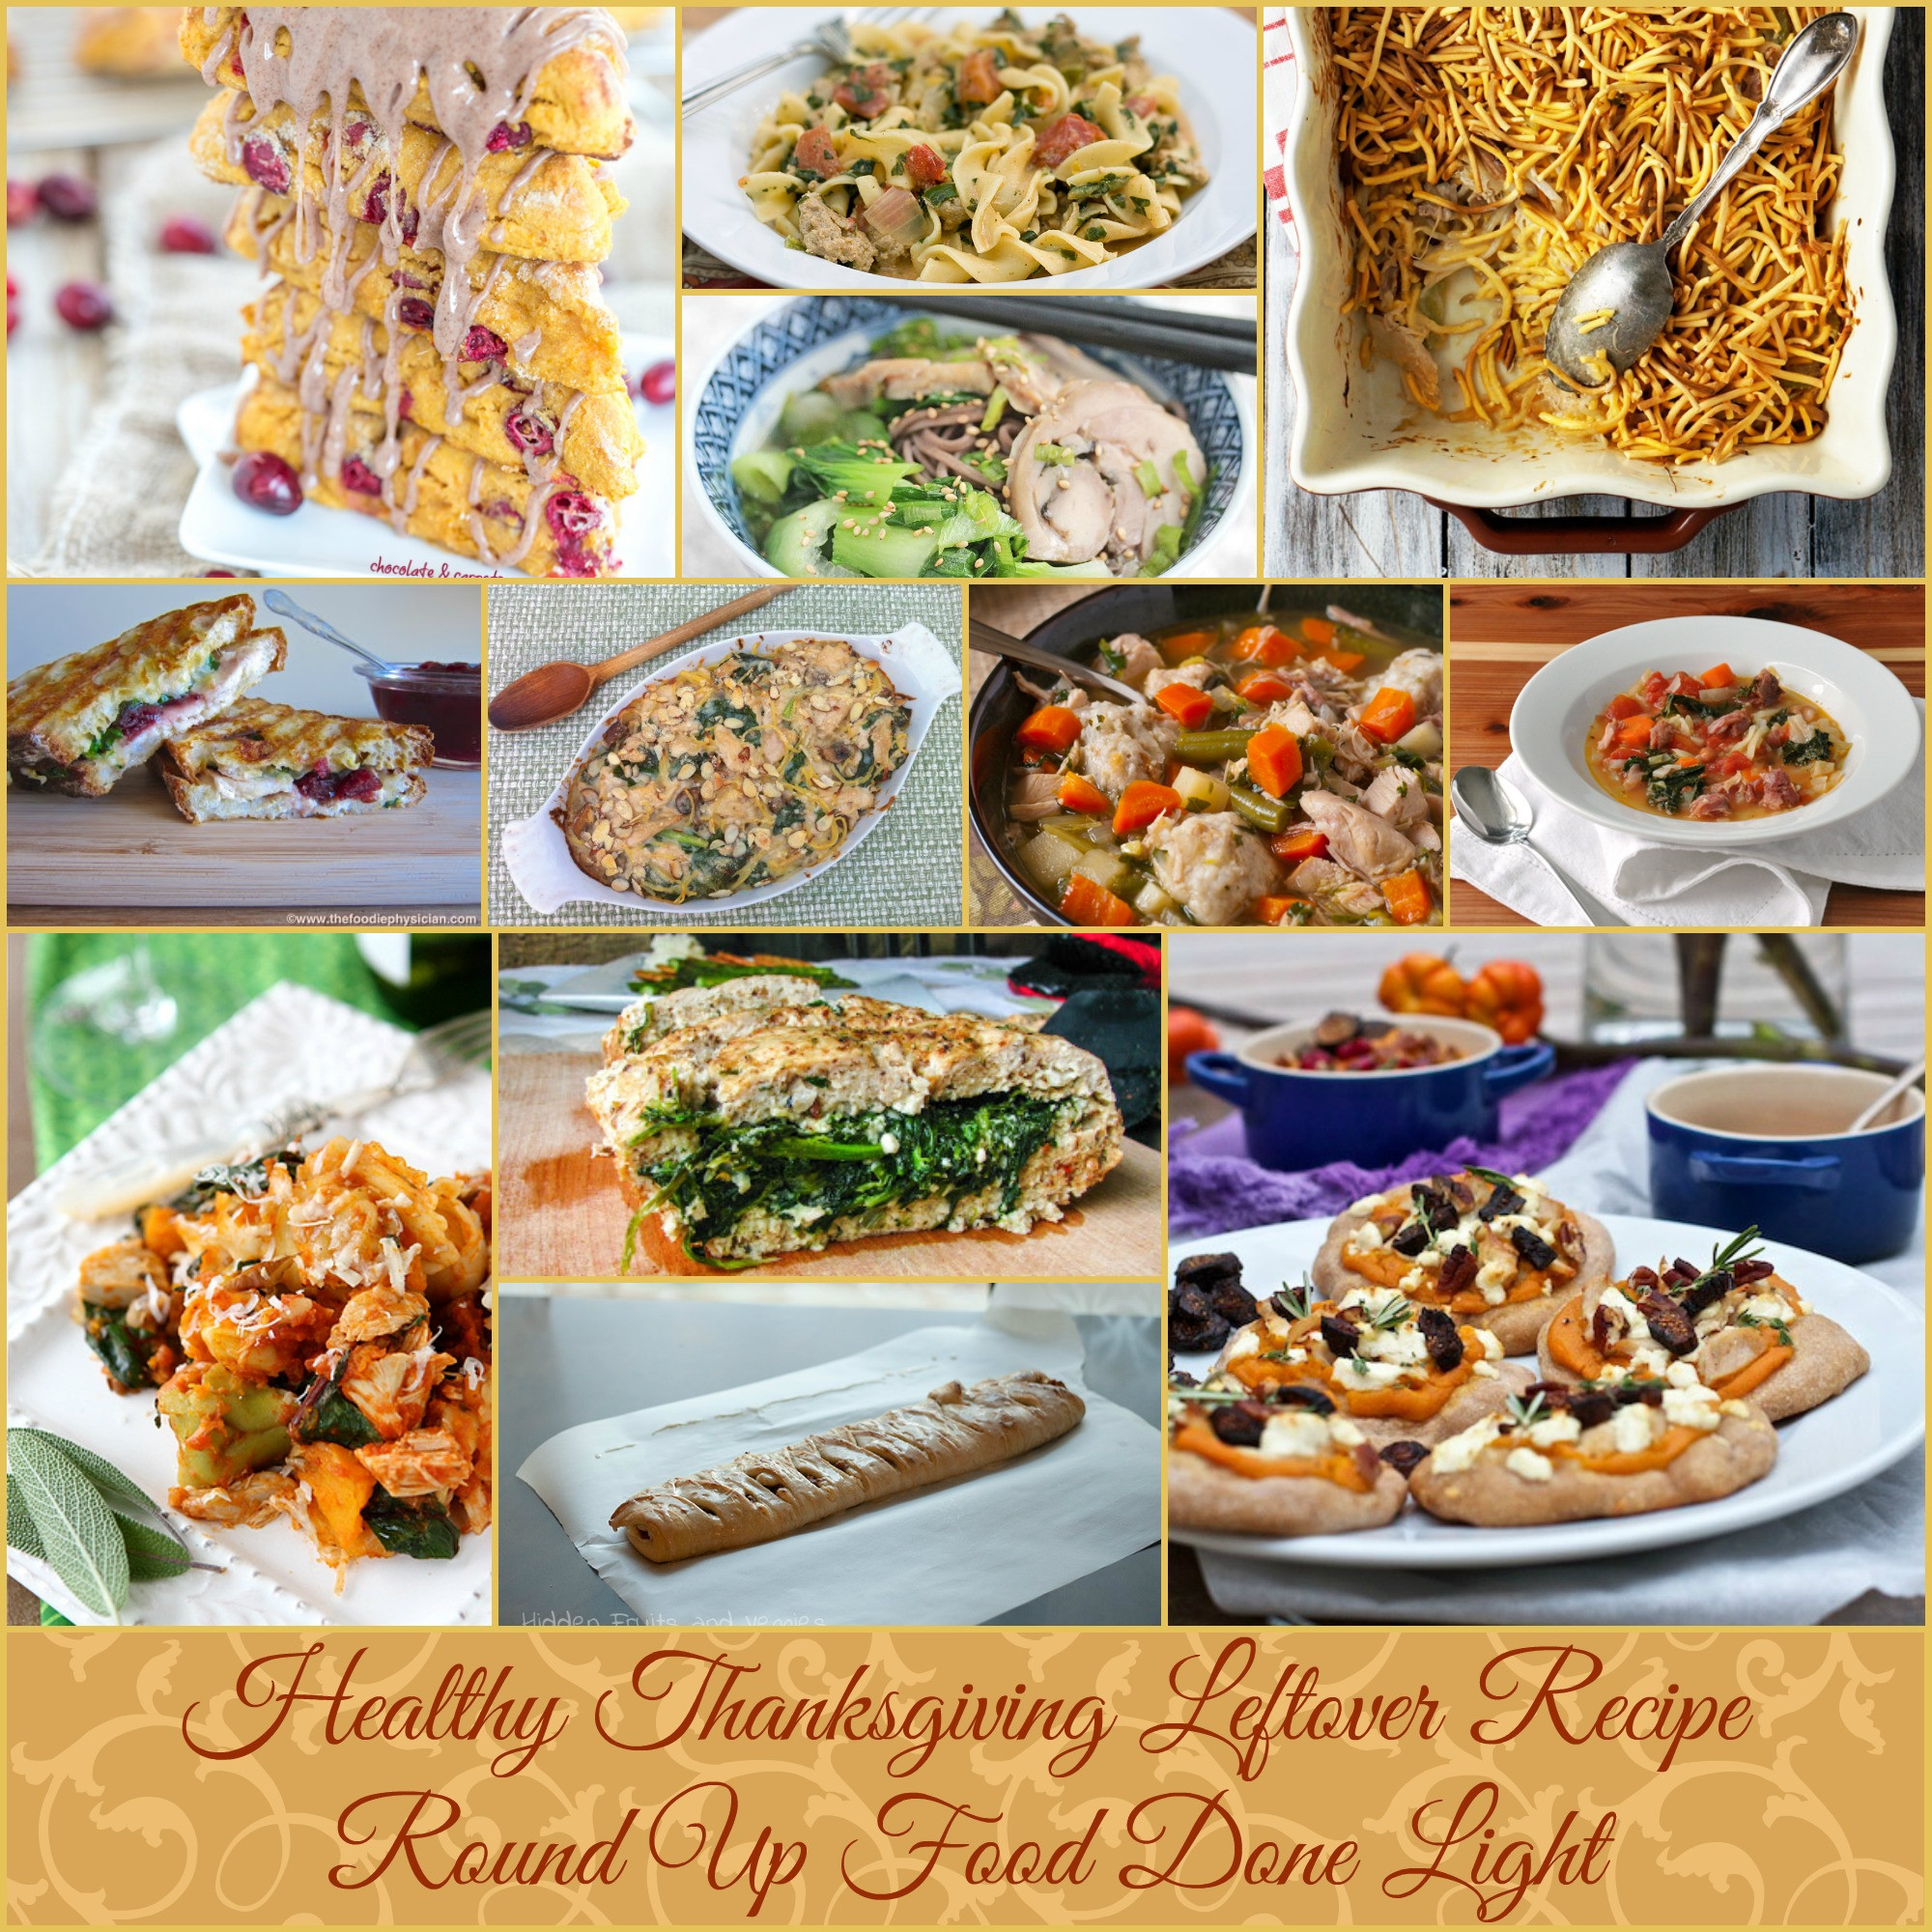 Healthy Thanksgiving Leftover Recipes
 Healthy Thanksgiving Leftover Recipes Round Up Food Done